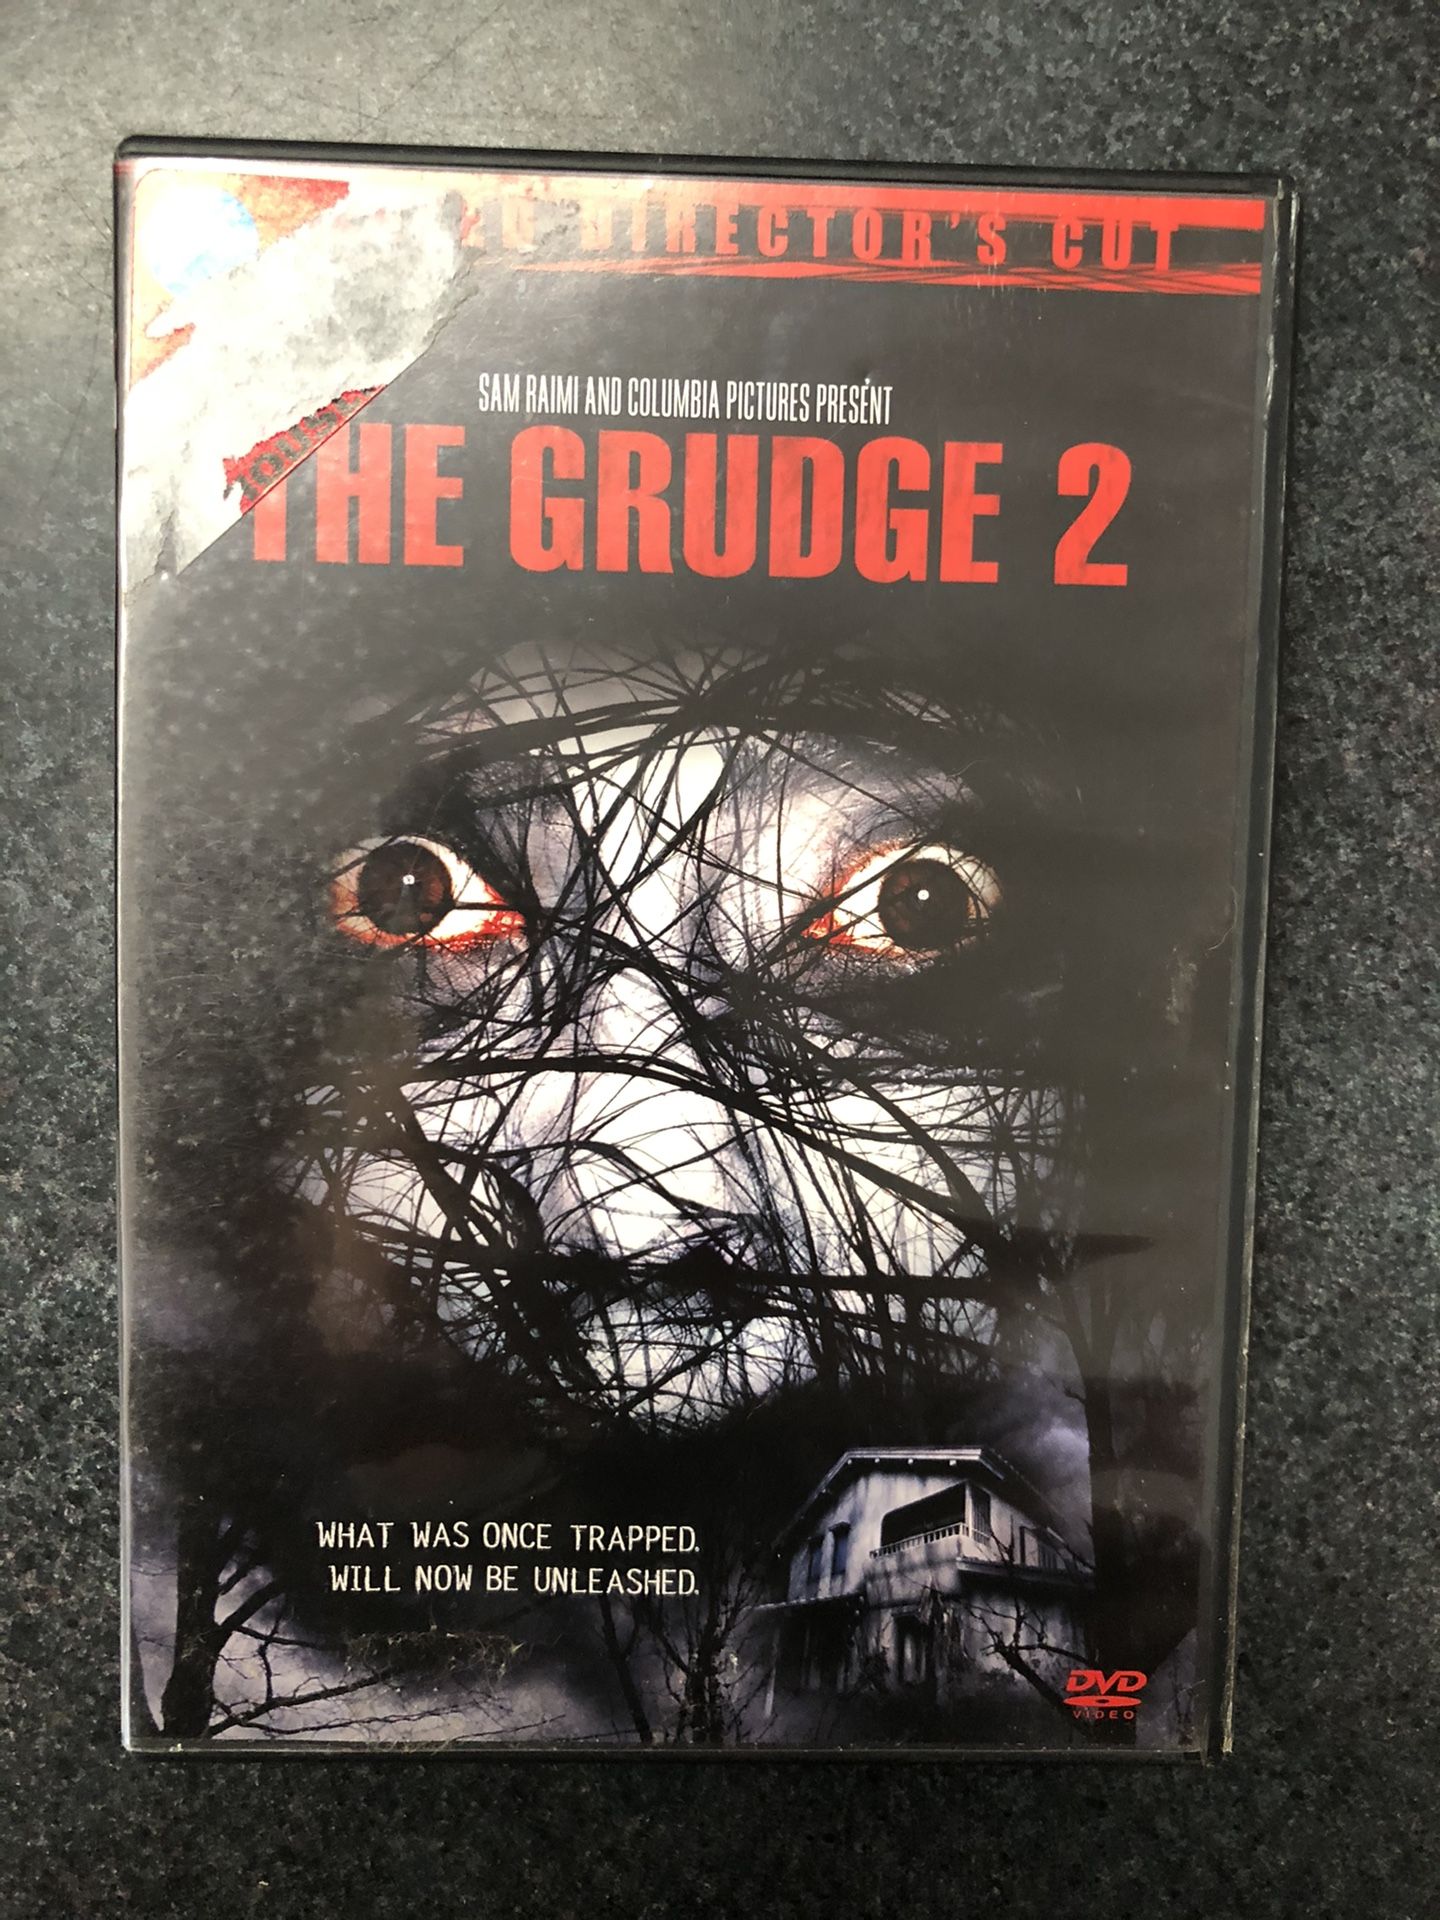 The Grudge 2 DVD - used